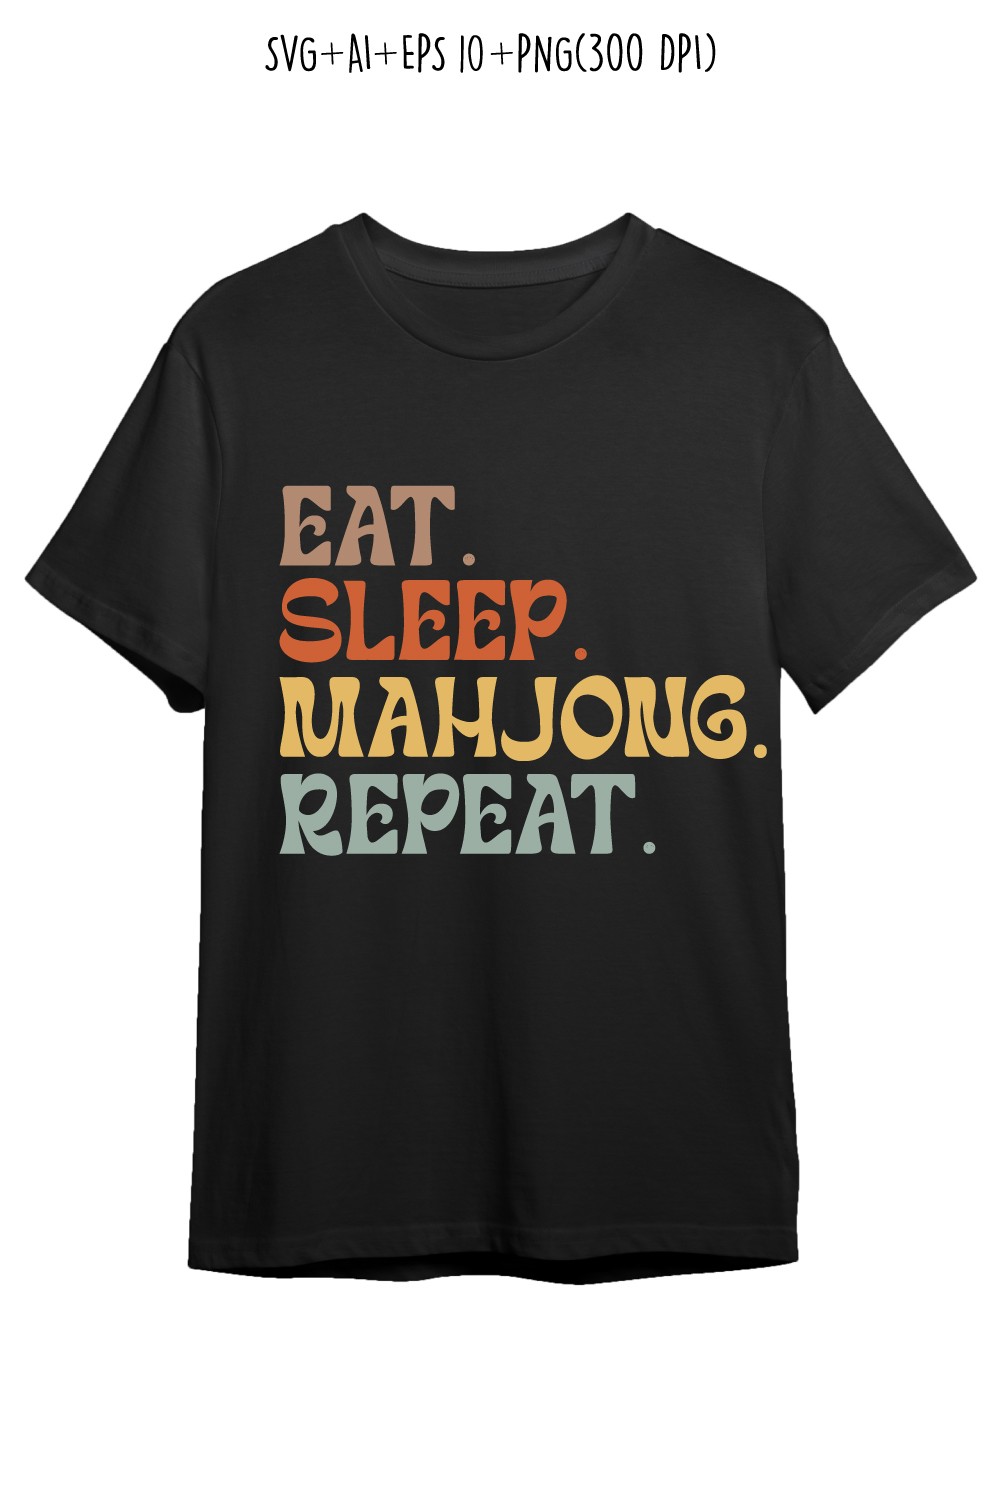 Eat Sleep Mahjong Repeat indoor game typography design for t-shirts, cards, frame artwork, phone cases, bags, mugs, stickers, tumblers, print, etc pinterest preview image.